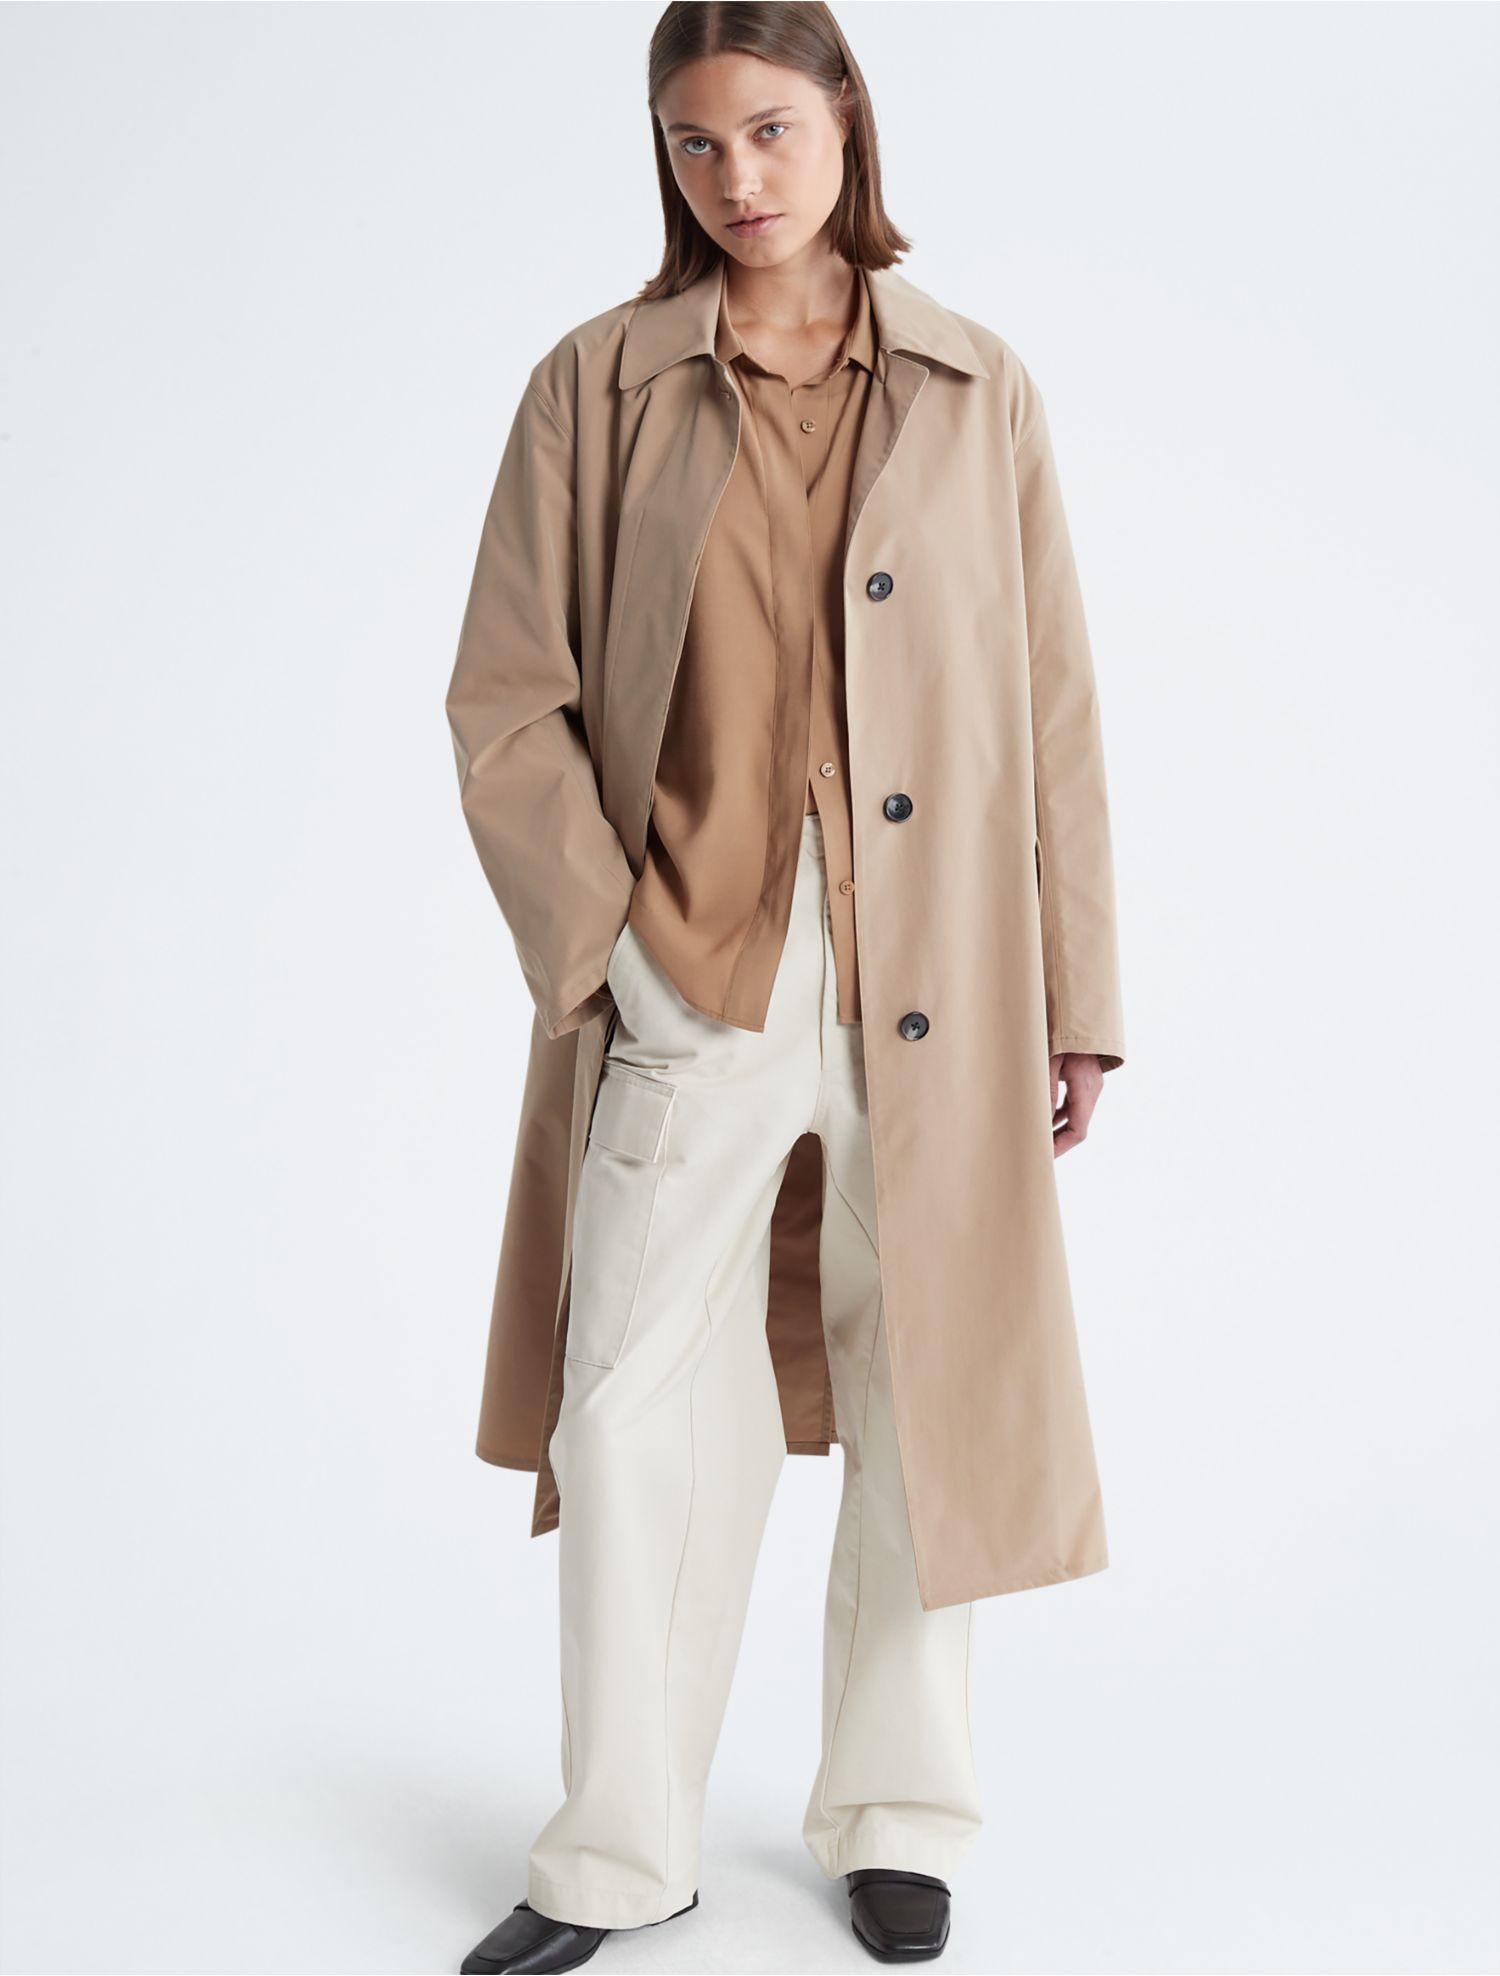 Calvin Klein Woven Trench Duster Coat in White | Lyst